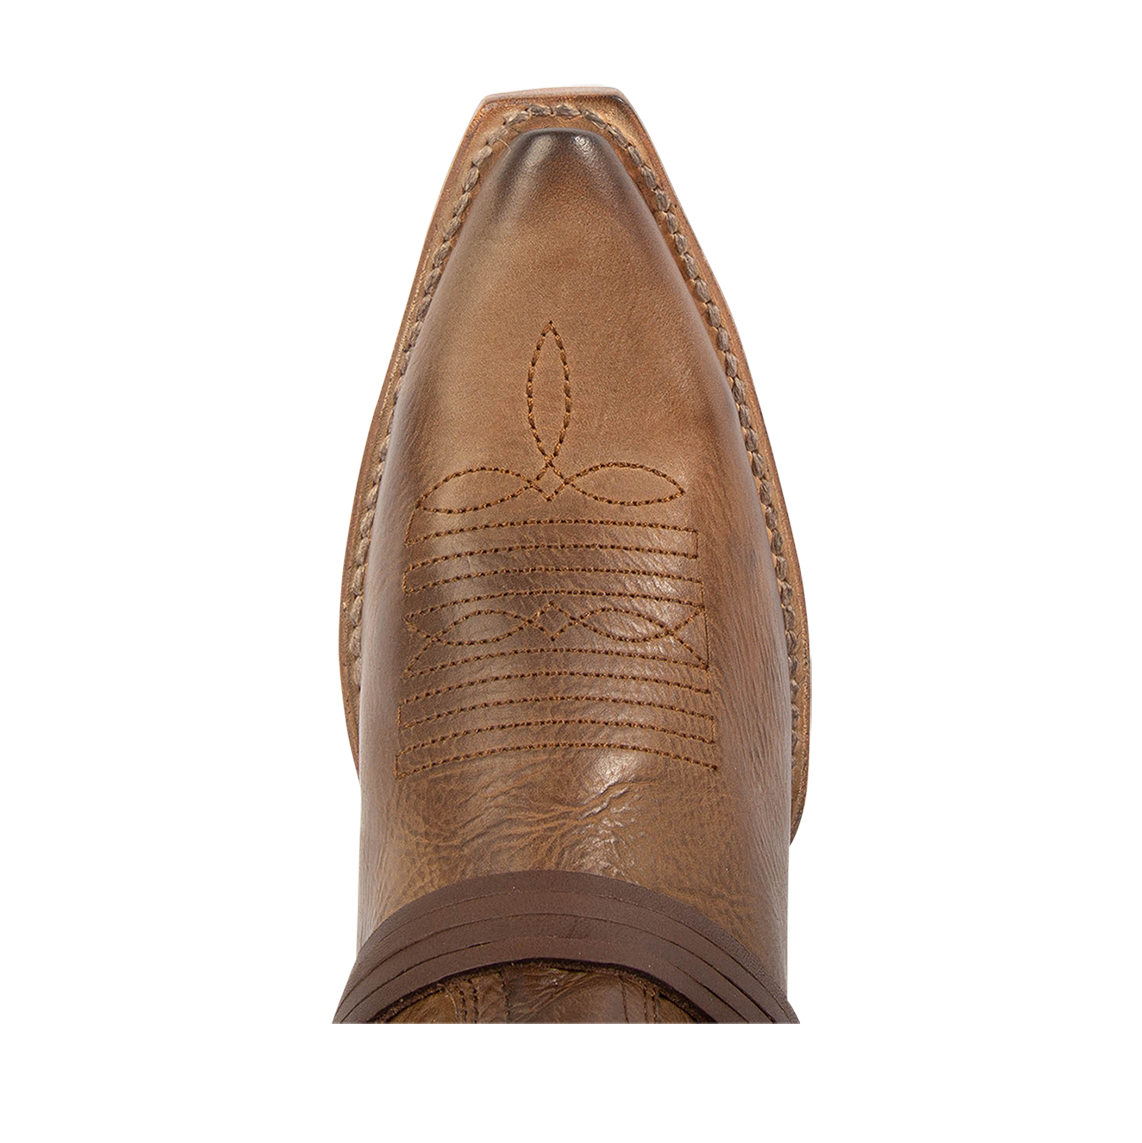 Top view showing snip toe construction with decorative stitch detailing on FREEBIRD women's Wardon tan leather cowboy boot with back lace panel